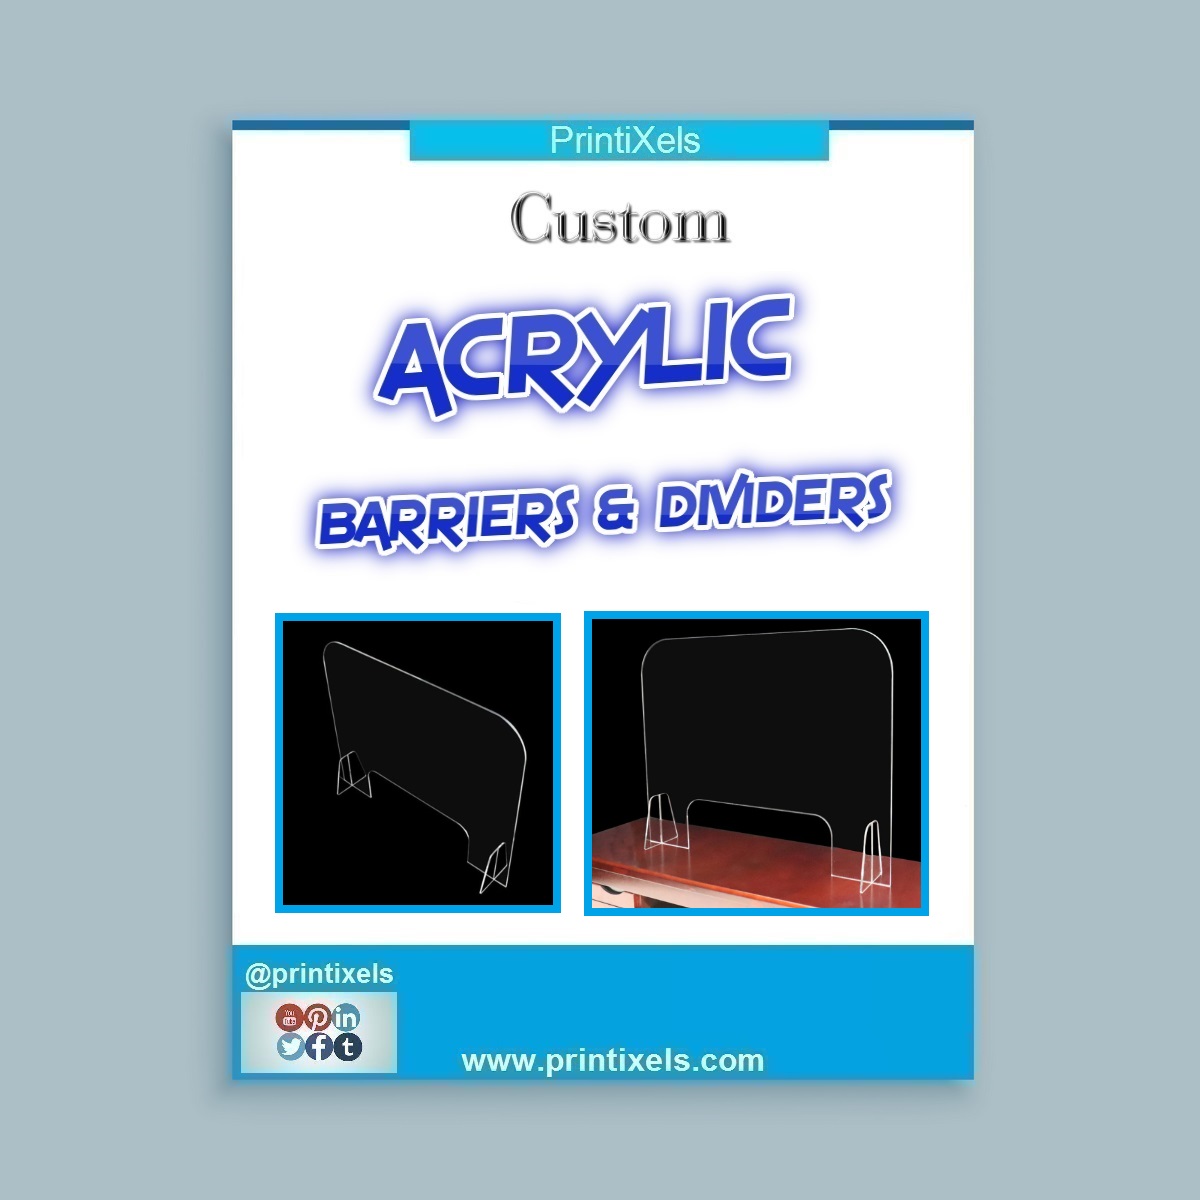 Custom COVID-19 Acrylic Barriers & Dividers Philippines